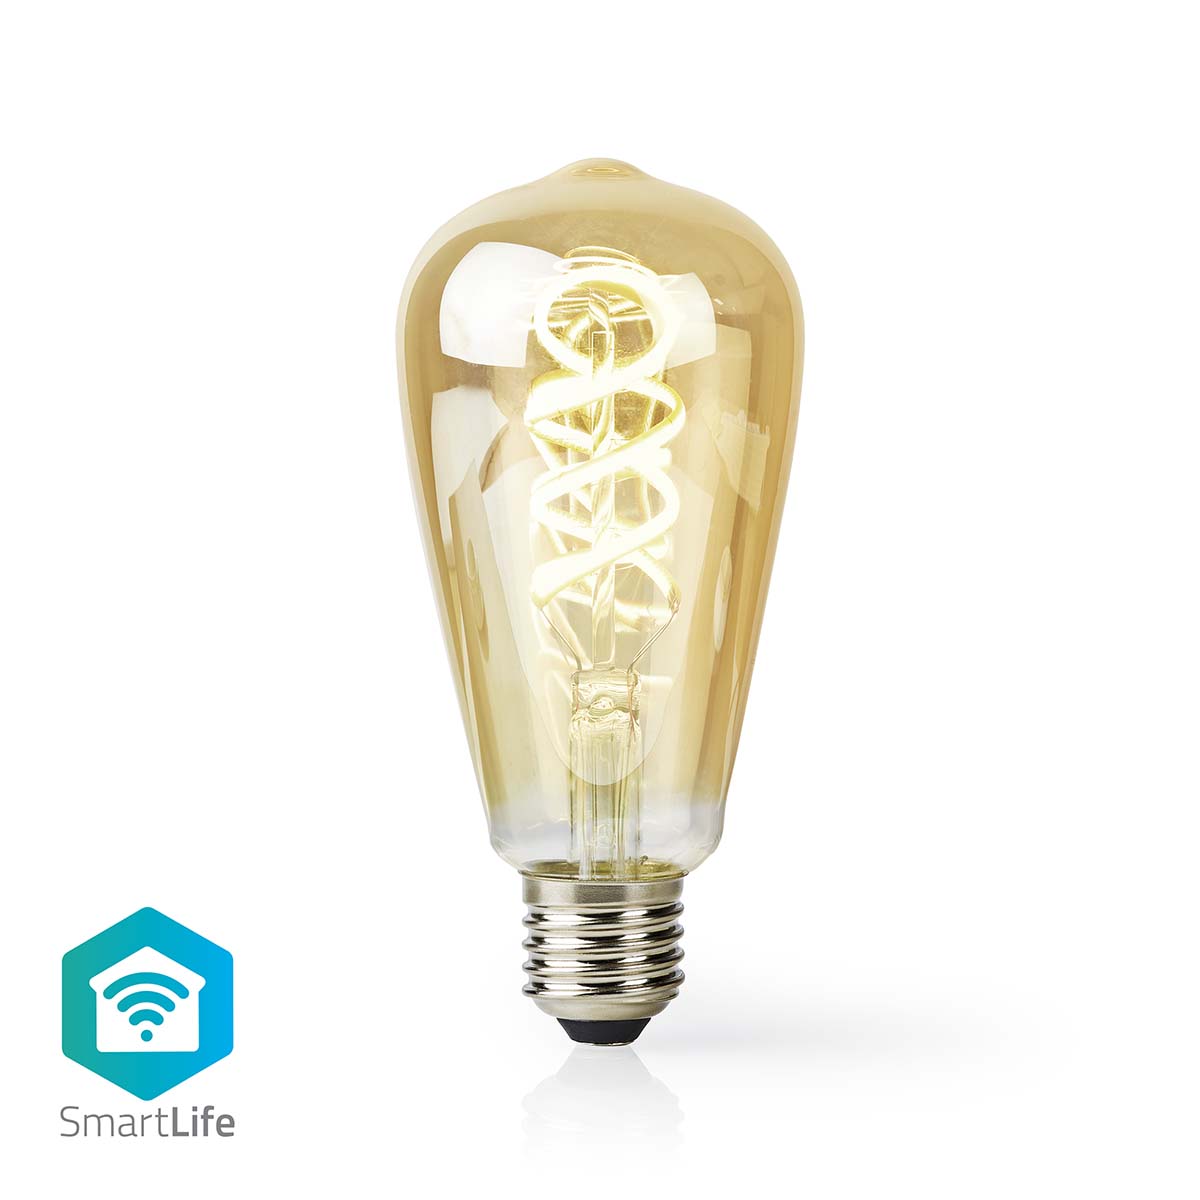 NEDIS SmartLife LED žárovka | Wi-Fi | E27 | 360 lm | 4.9 W | Warm to Cool White | 1800 - 6500 K | Sklo | Android™ / IOS | ST64